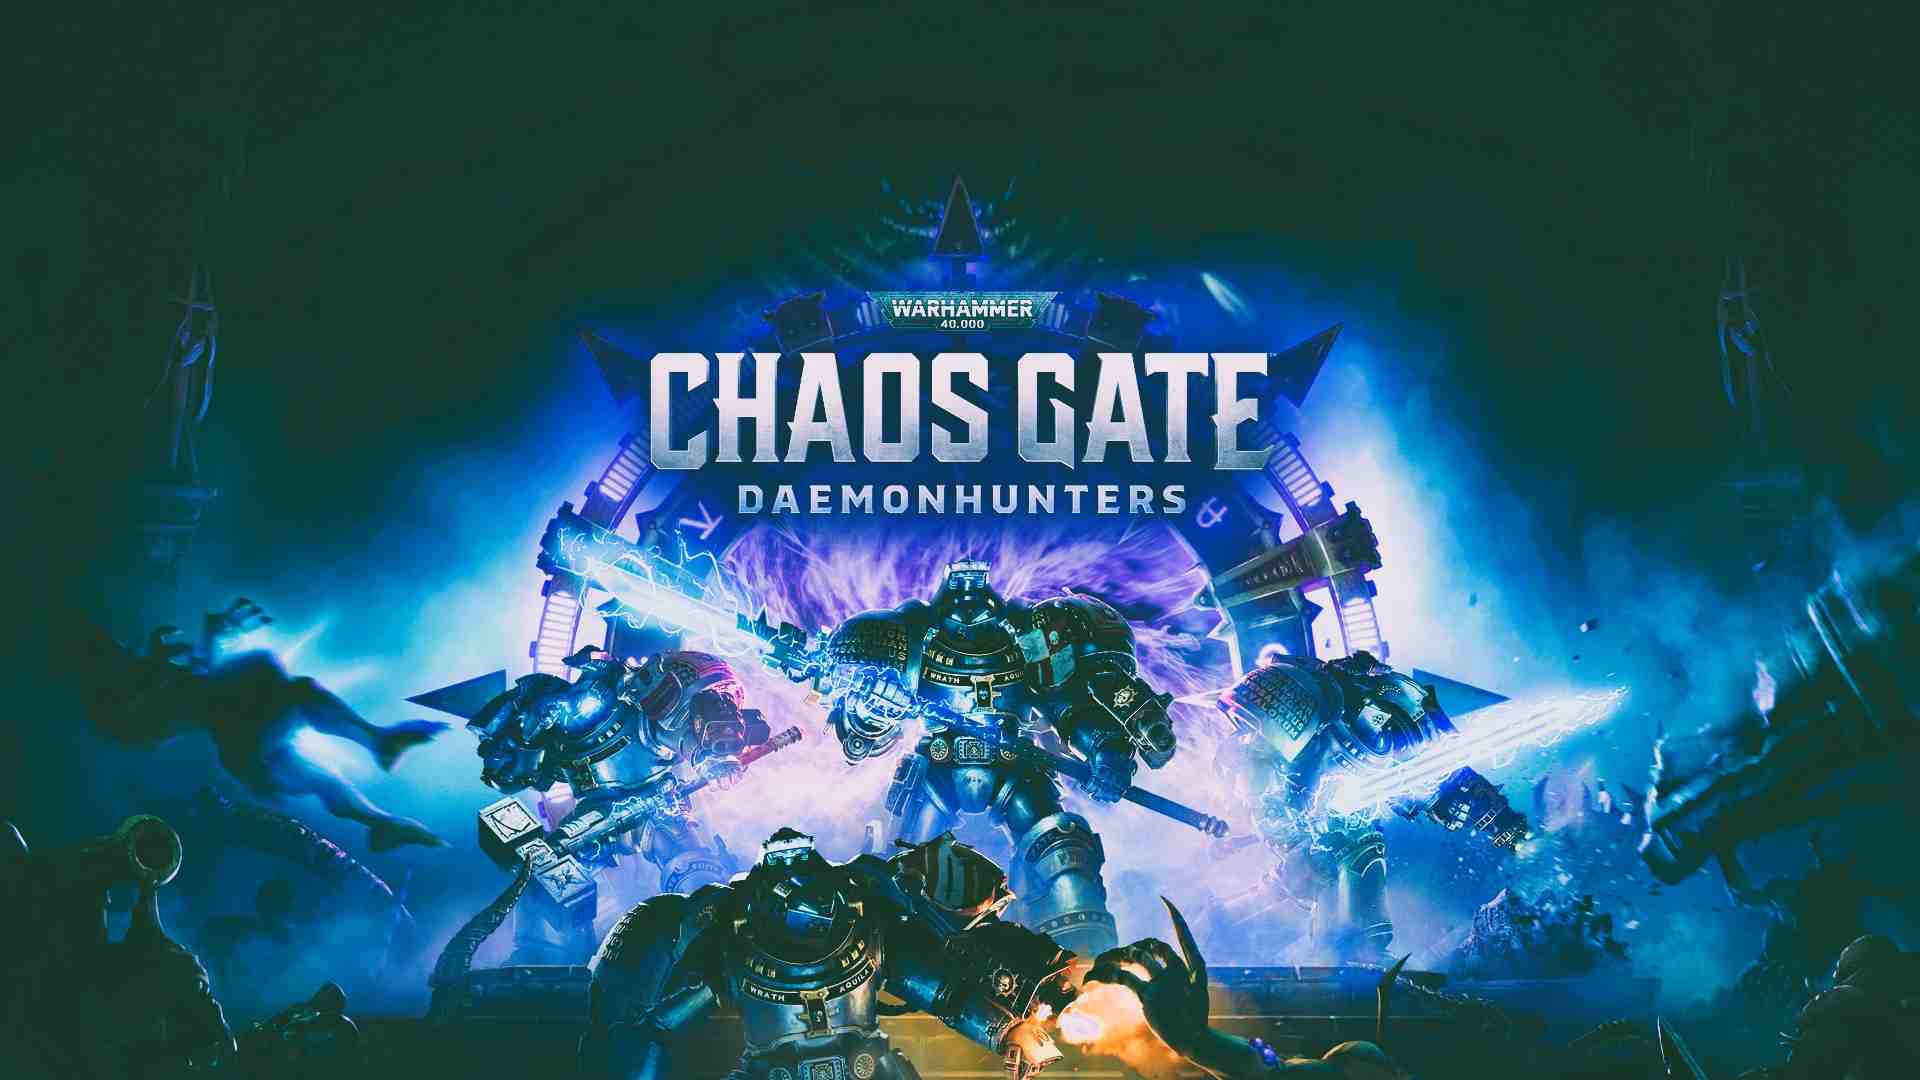 Warhammer 40000 Chaos Gate Daemonhunters Age Rating, Parents Guide